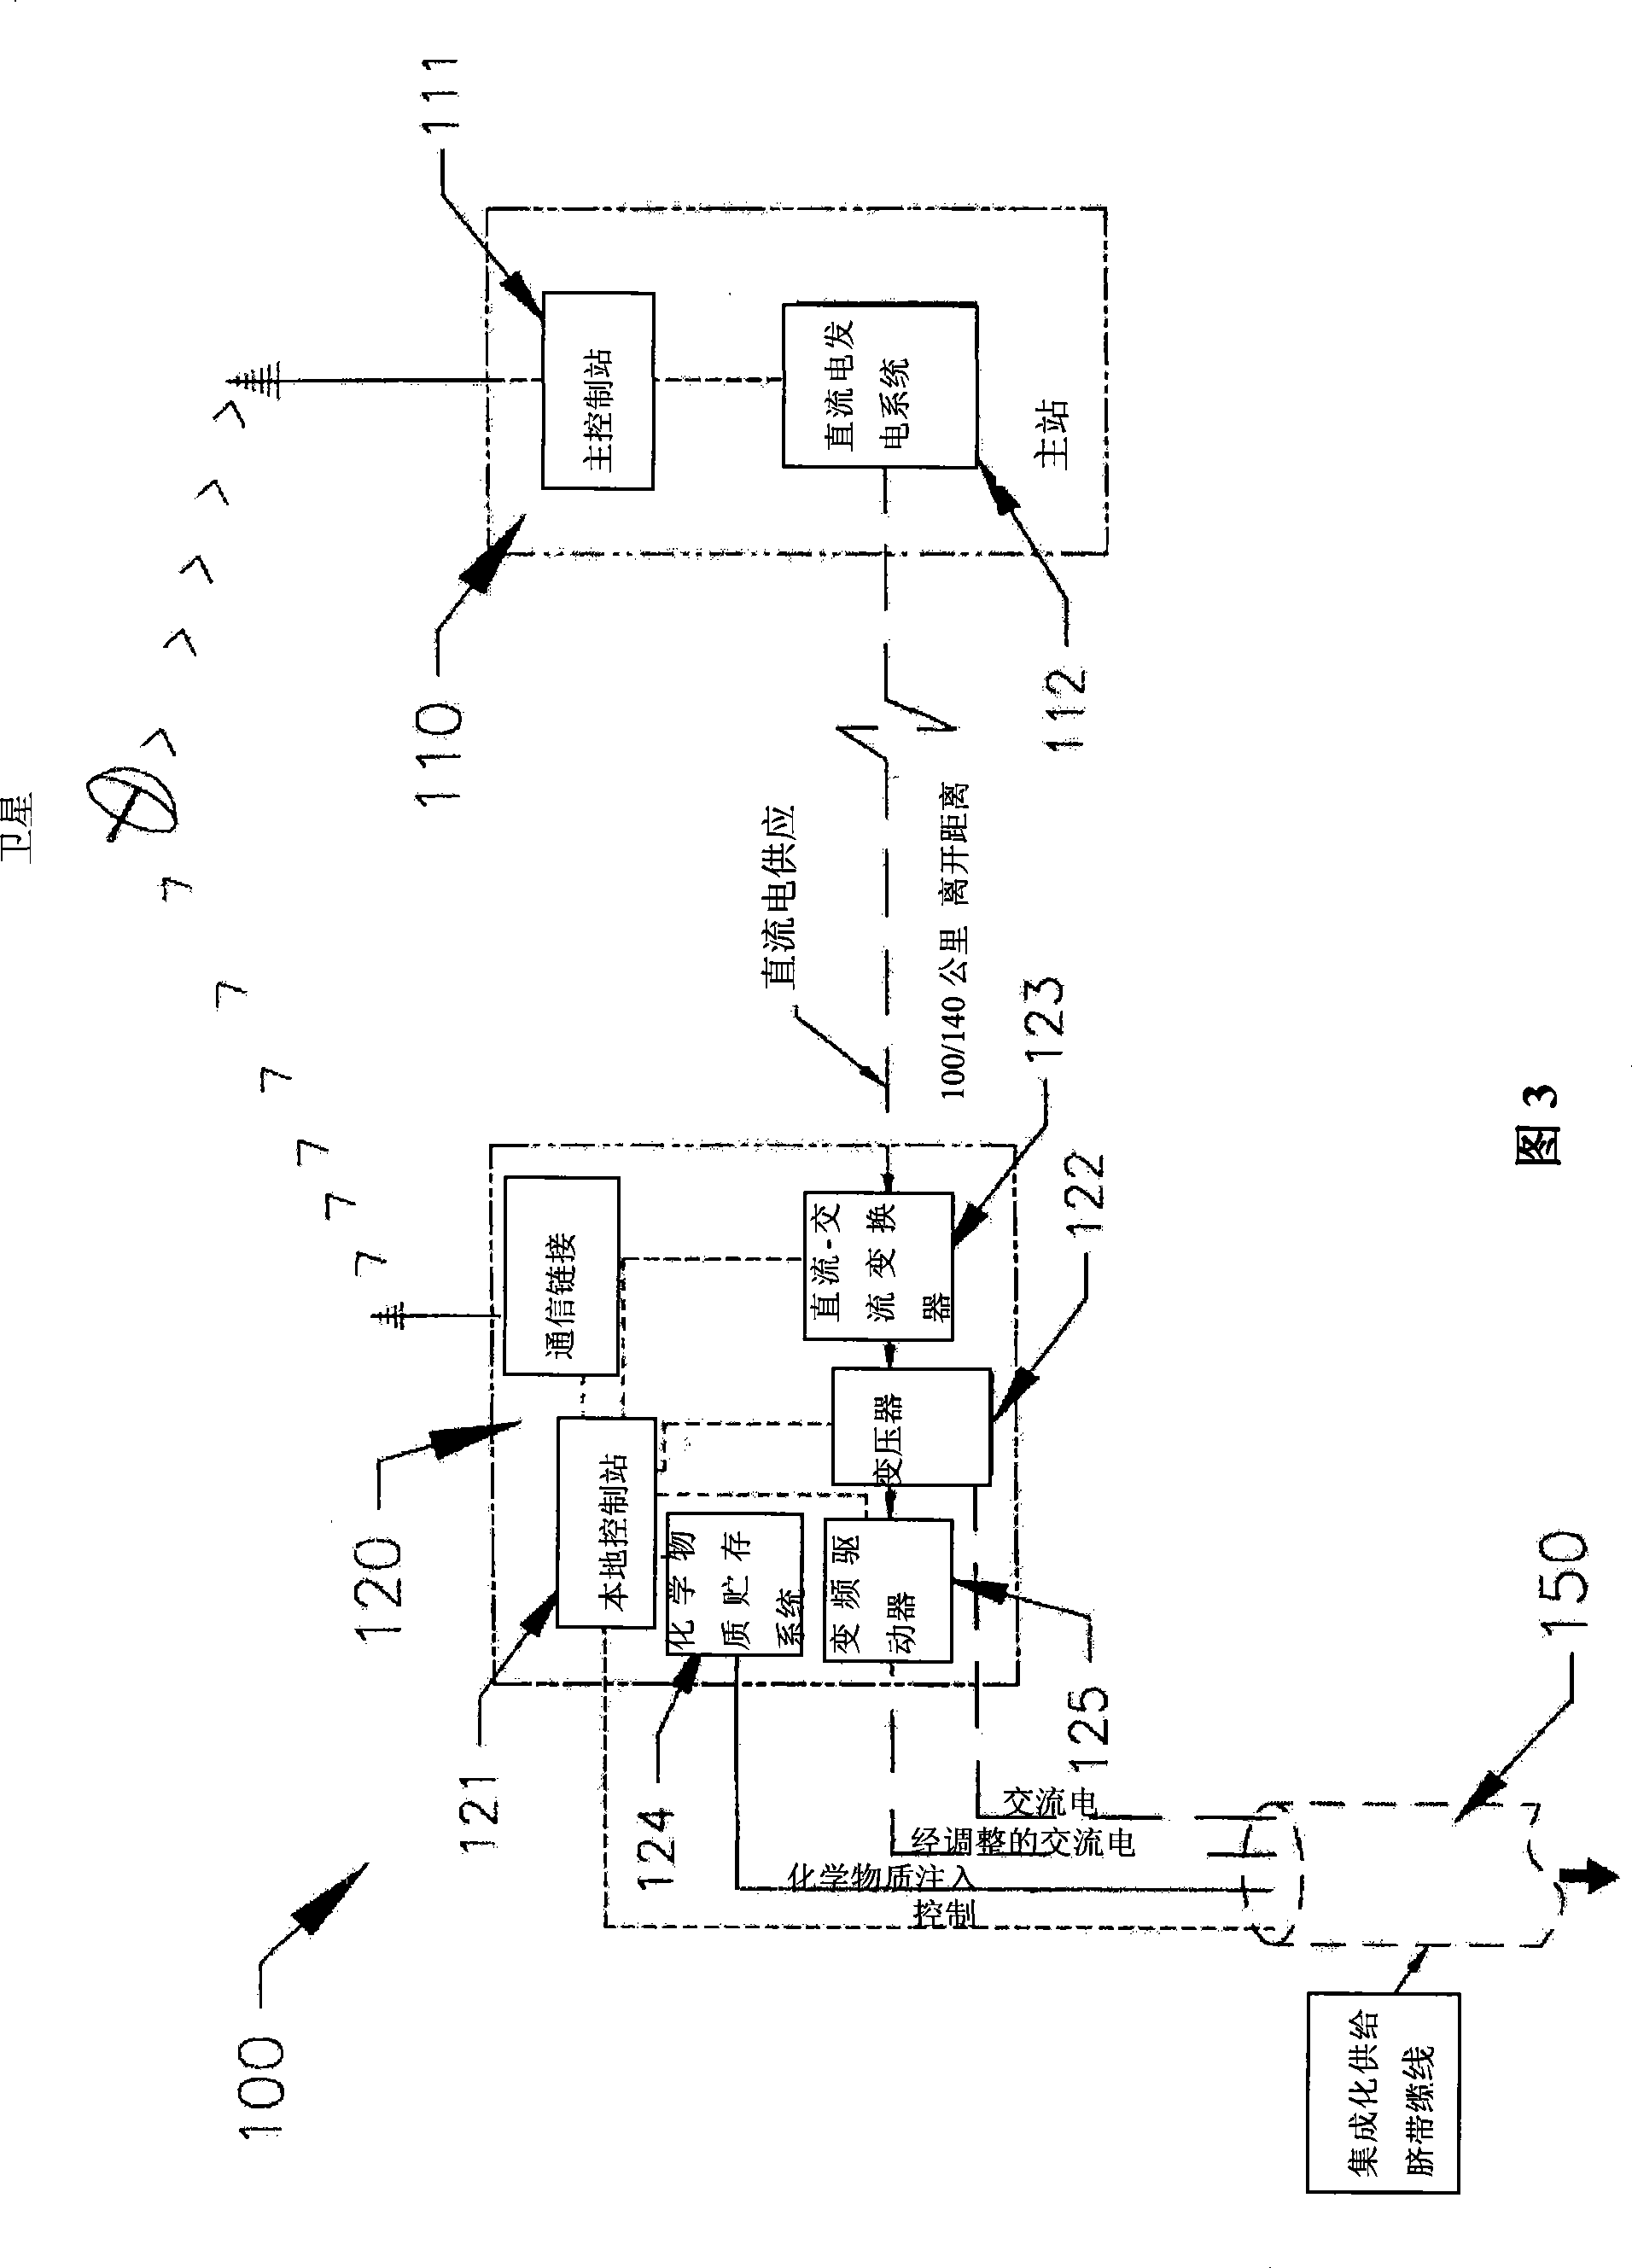 Electrical power transmission system